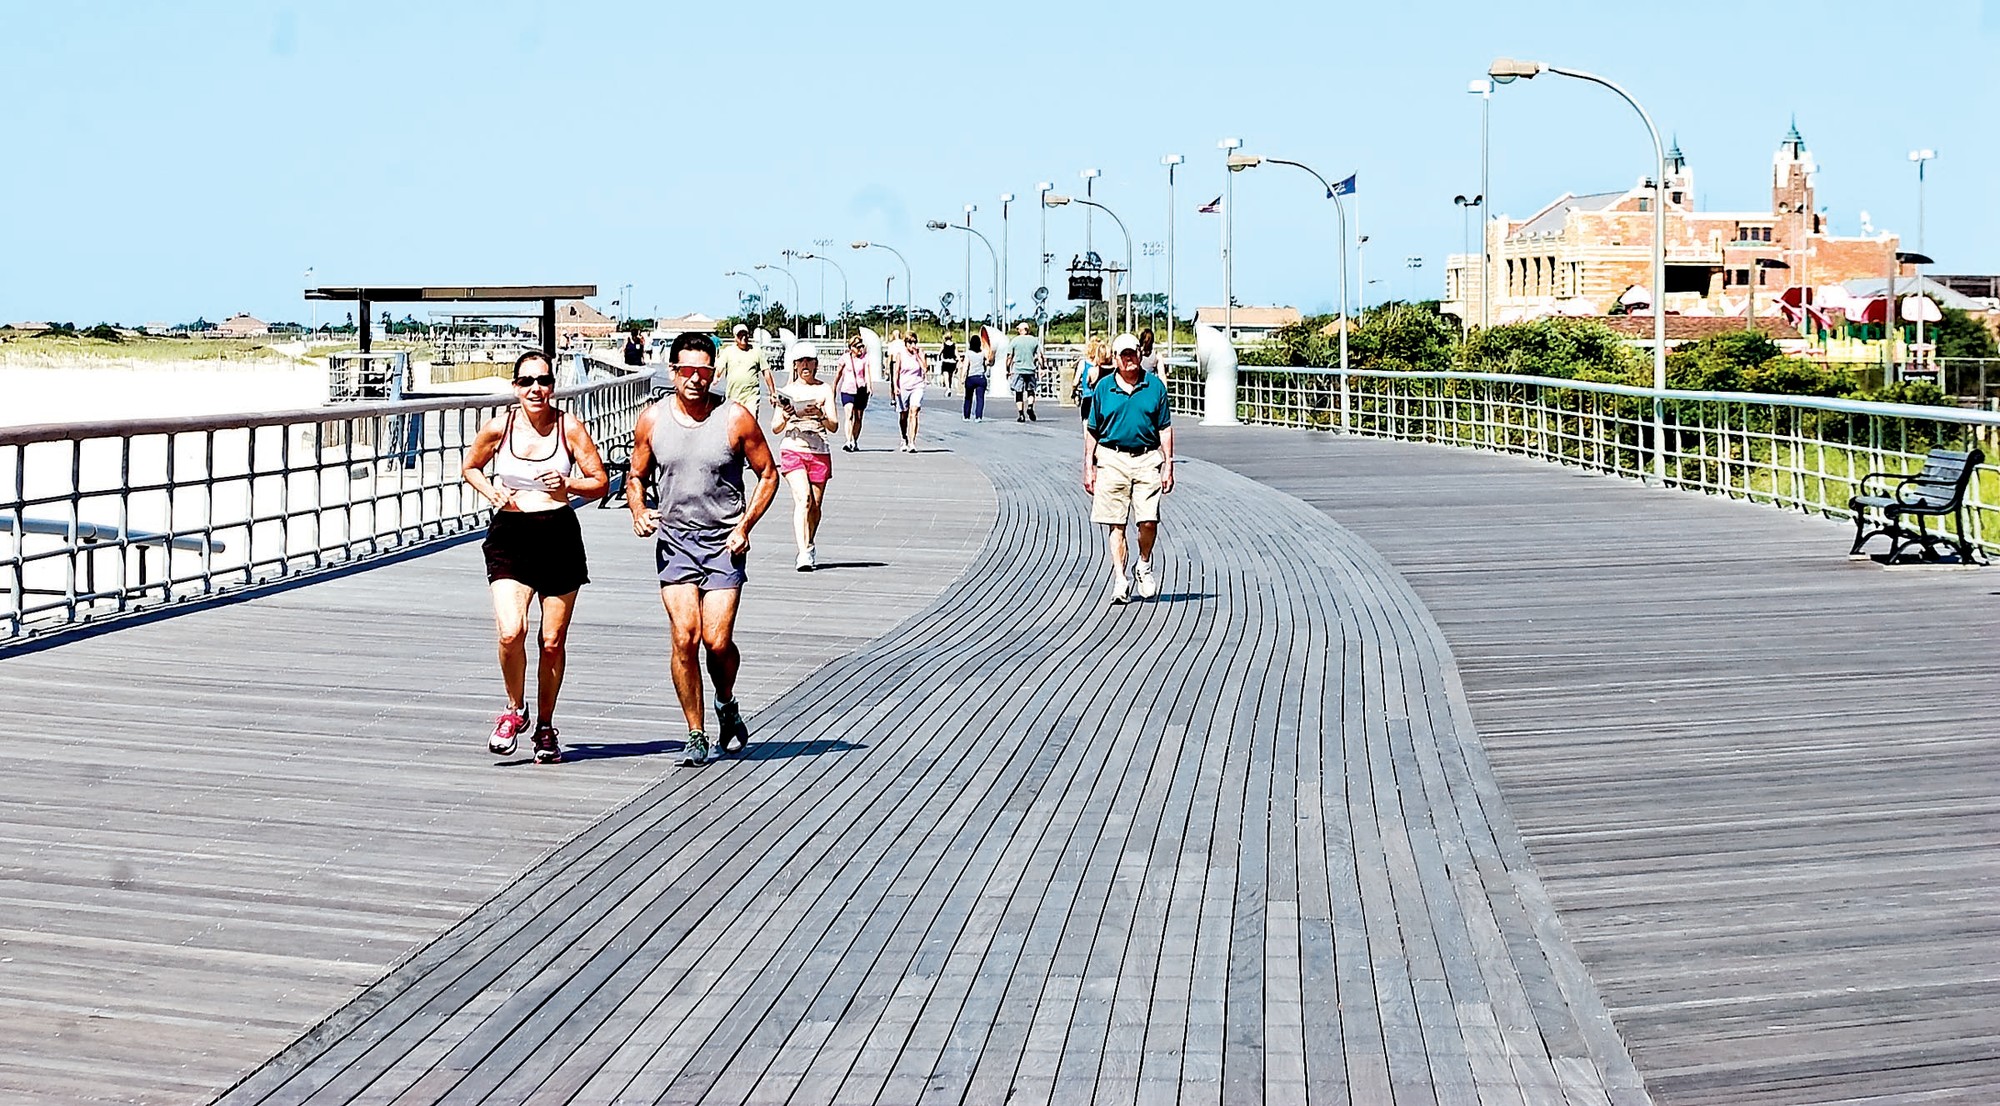 After Sandy, the Jones Beach boardwalk was rebuilt with Brazilian hardwood to enable it to withstand a storm the strength of Sandy.